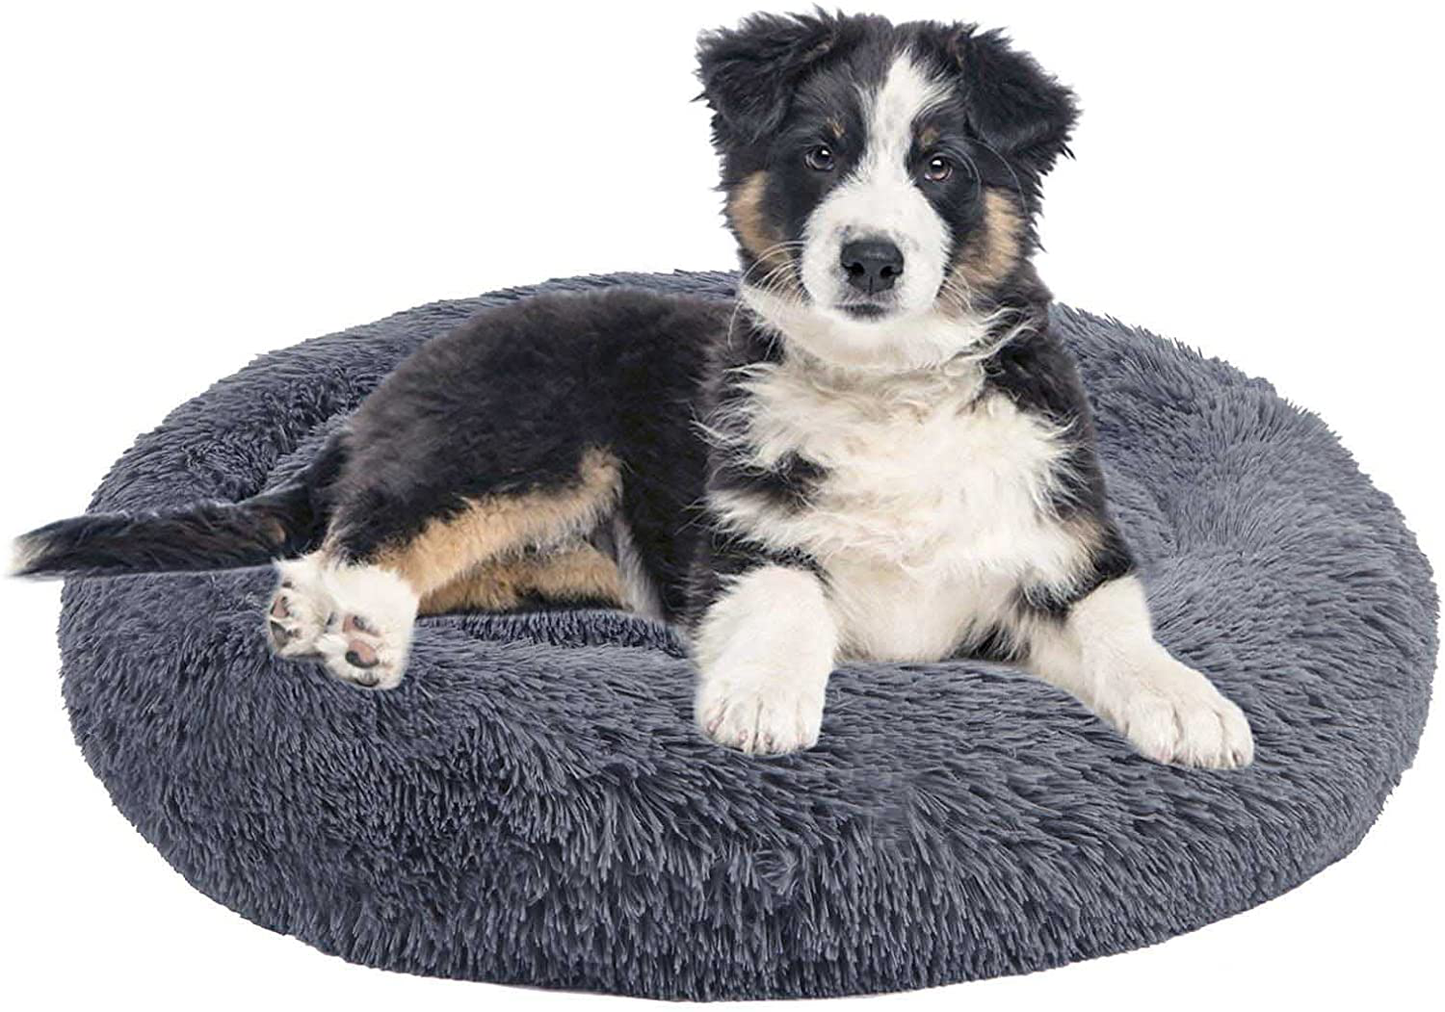 GROOBOLL Cat Bed, Donut Dog Bed, Anti-Anxiety Plush Calming Dog Bed, Soft Fuzzy round Dog Bed, Washable Fluffy Dog Beds for Small Medium Dogs and Cats (20"/24"/28")